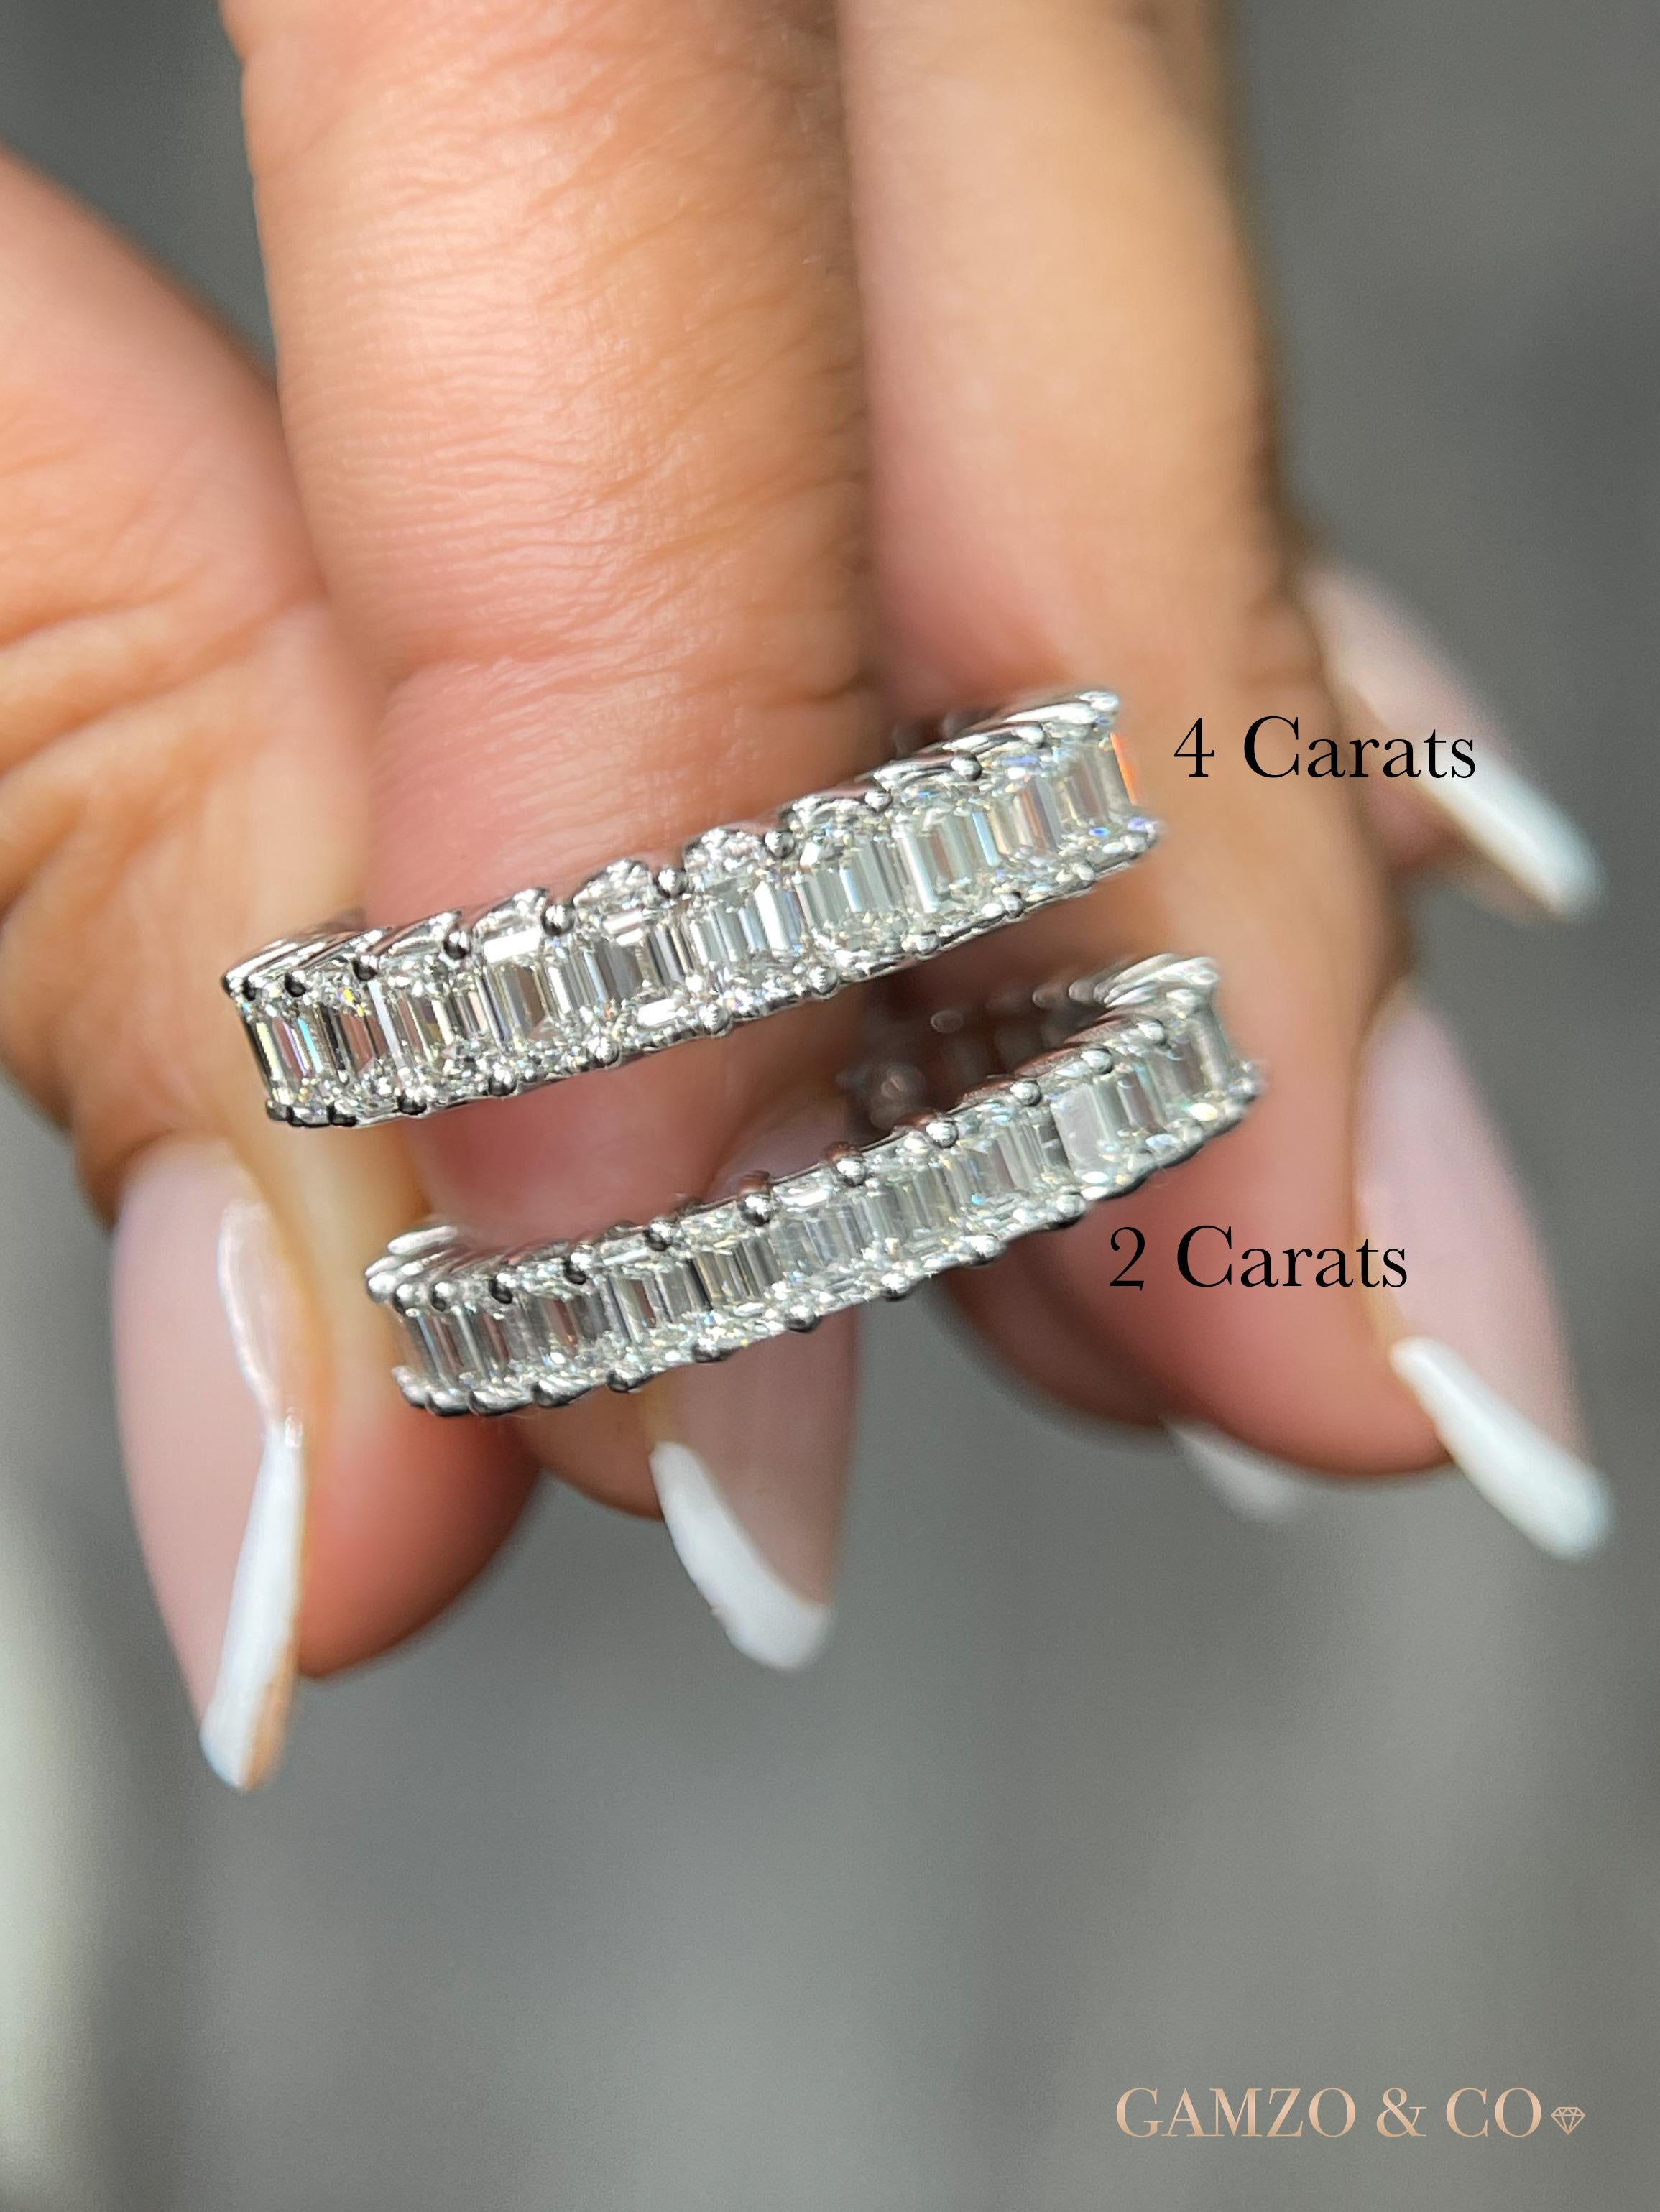 For Sale:  18k White Gold 2.5 Carat Emerald Cut Natural Diamond Eternity Ring 3